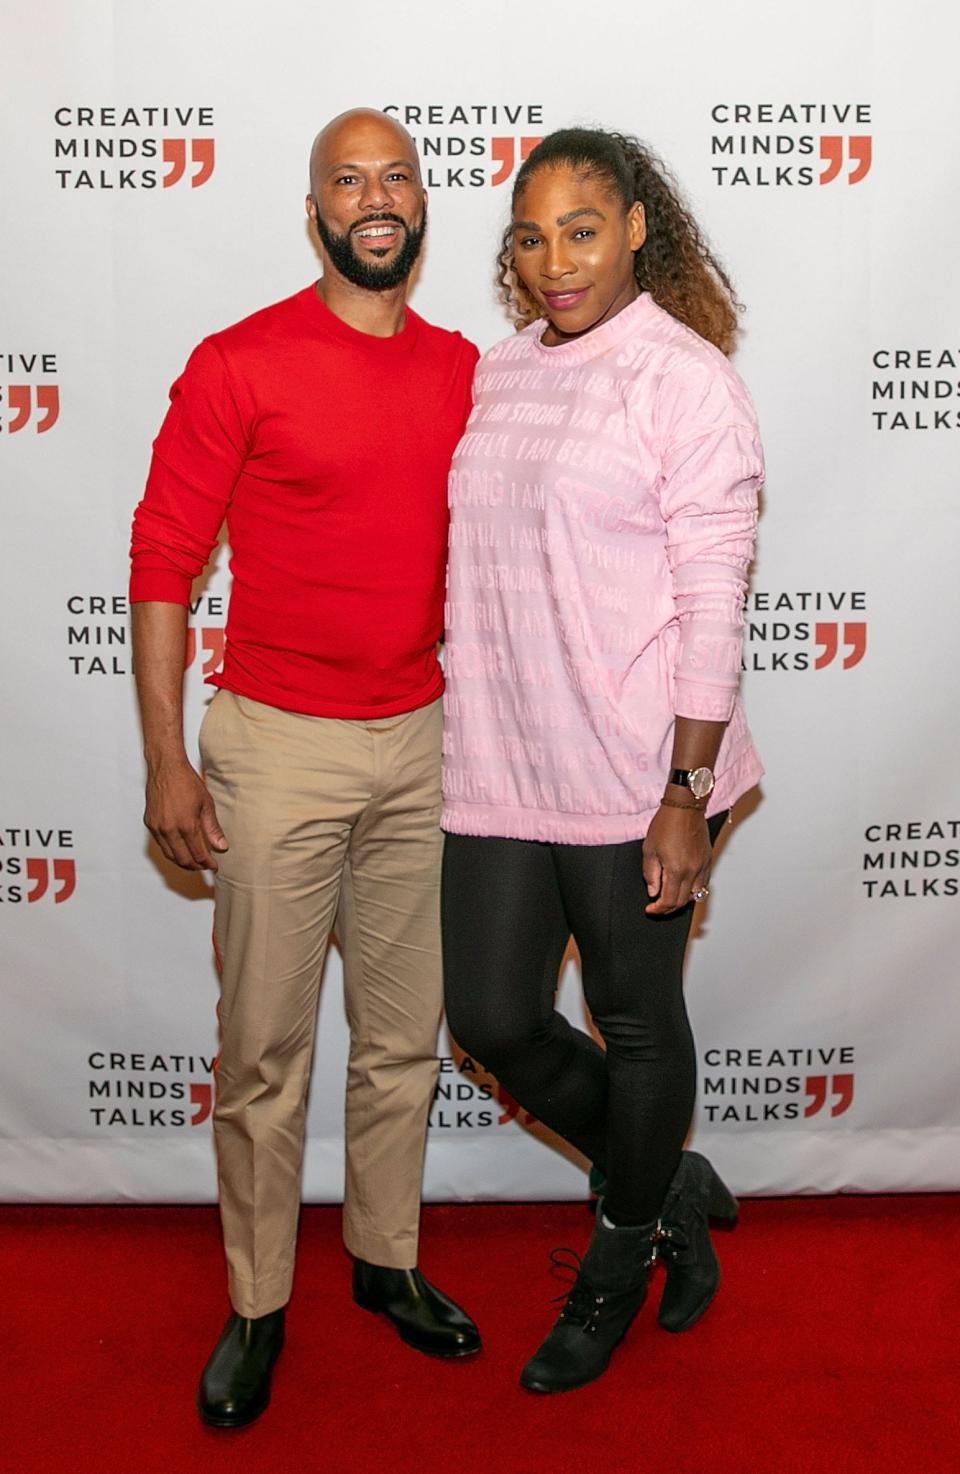 Common (left) and Serena Williams attend Creative Minds Talks Presents a Conversation Between Athlete, Entrepreneur, And Philanthropist, Serena Williams And Award-Winning Artist, Actor, And Activist Common at Civic Opera House on October 29, 2018 in Chicago, Illinois.